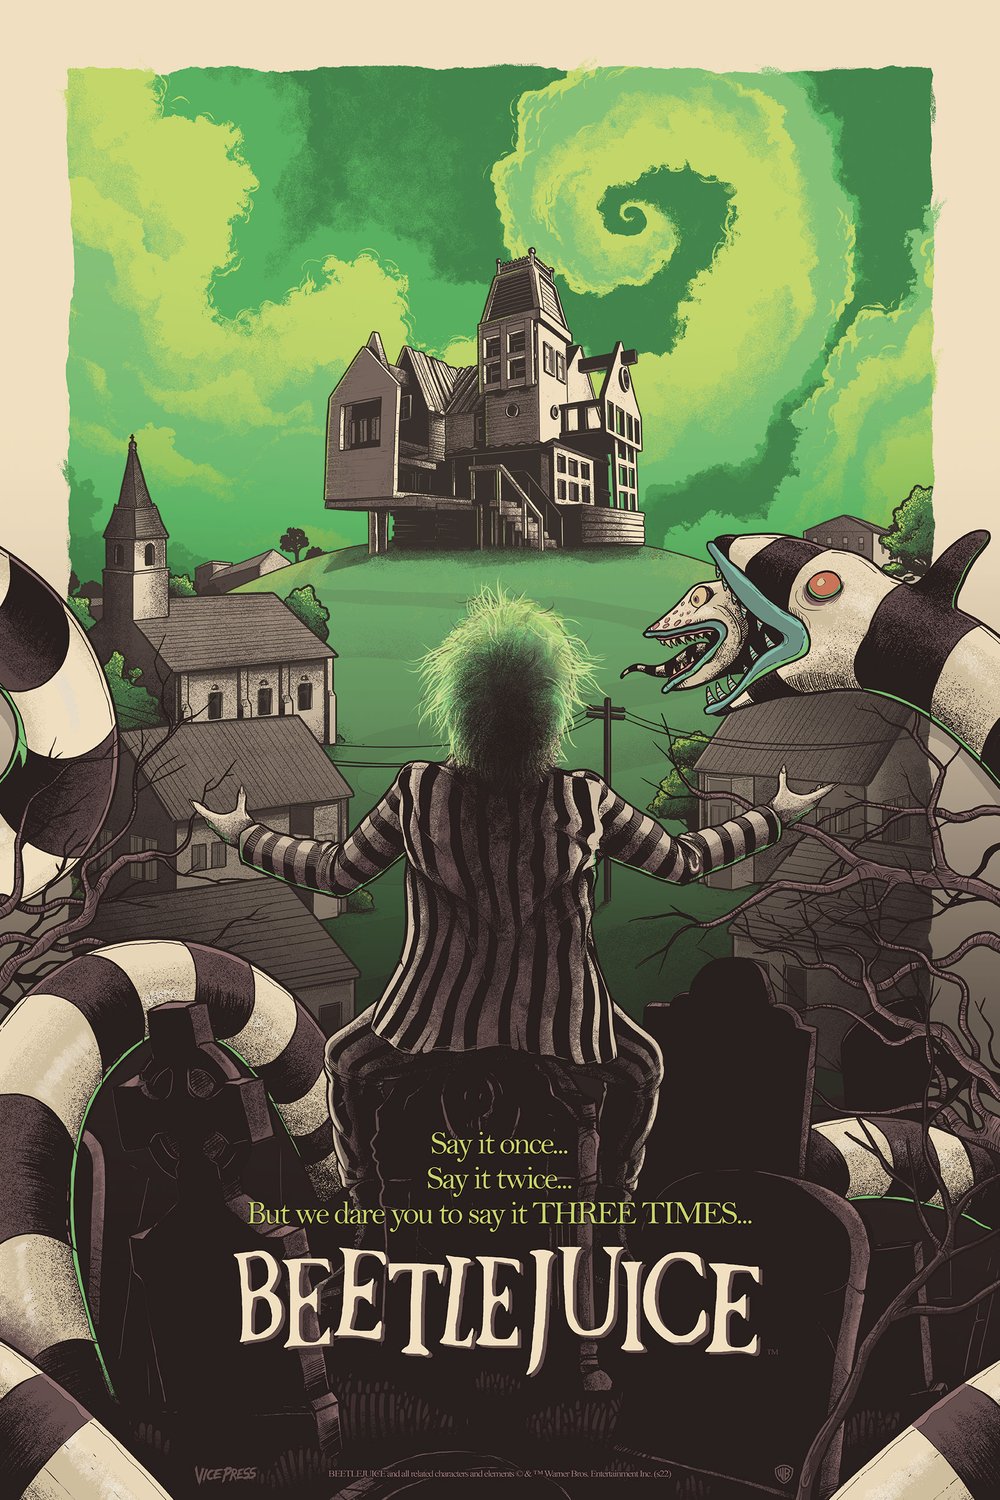 Beetlejuice - 24x36" Lithograph and Holofoil 